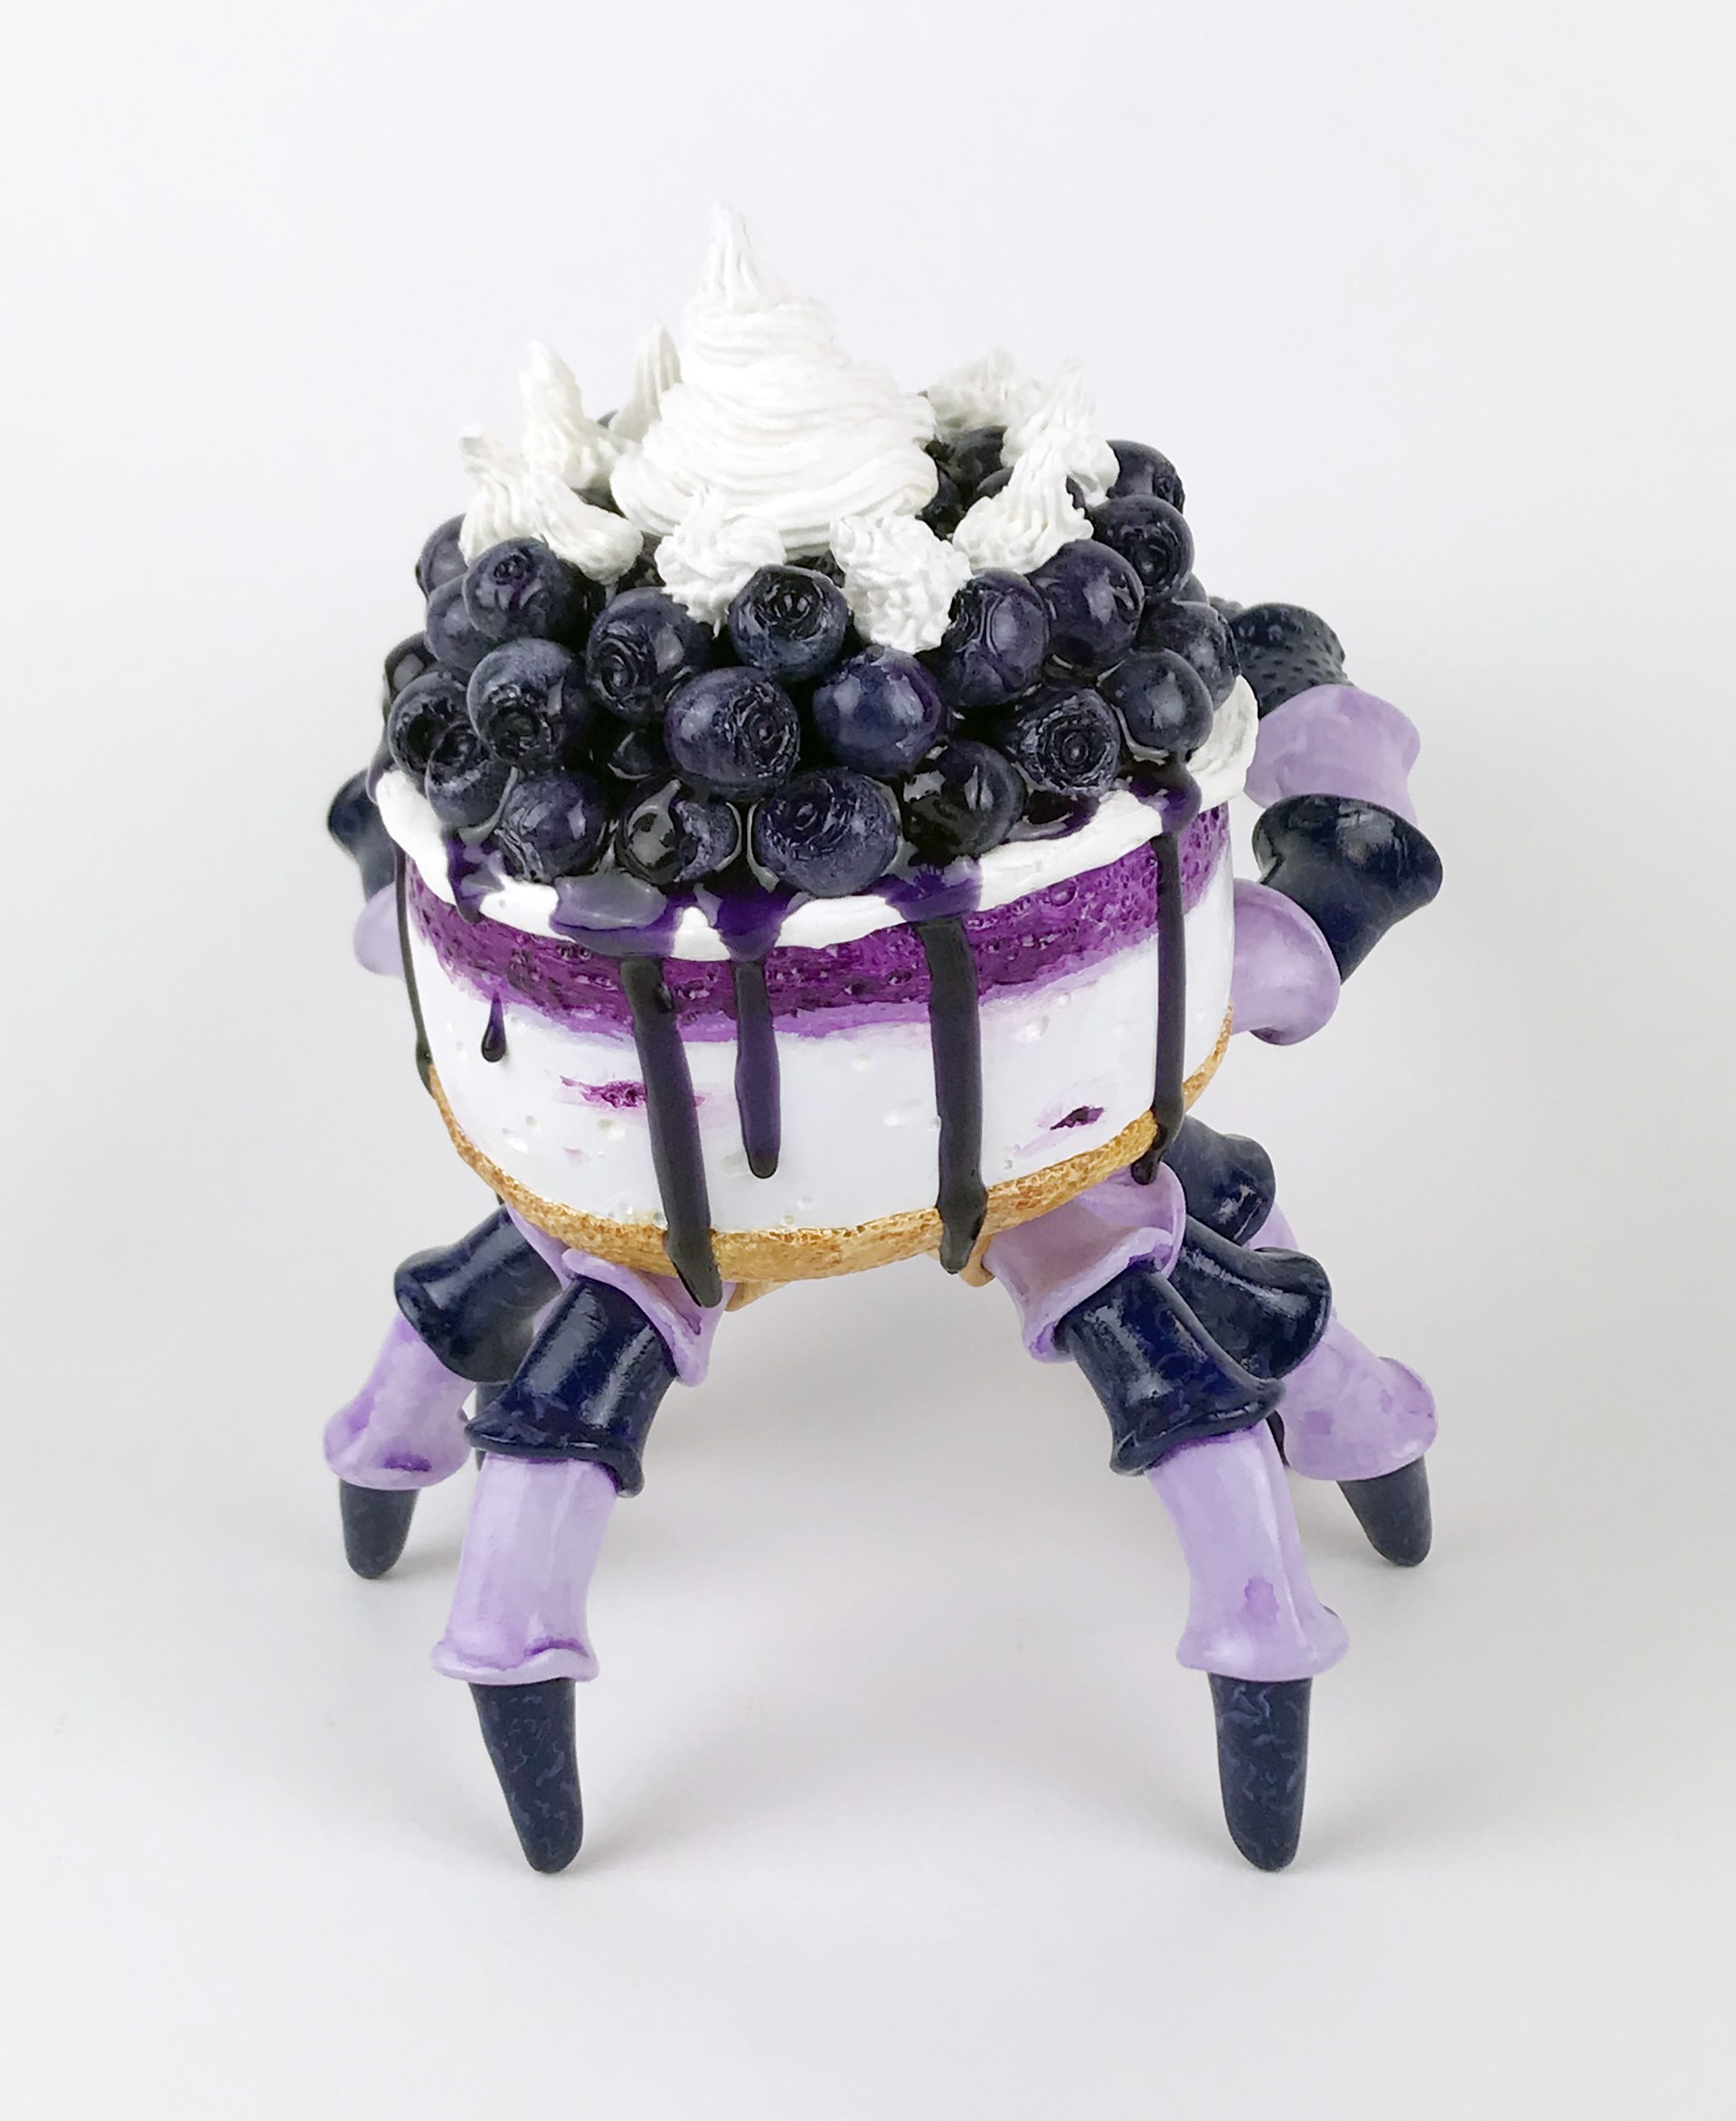 Blueberry Cheese Crabcake by Corina St. Martin